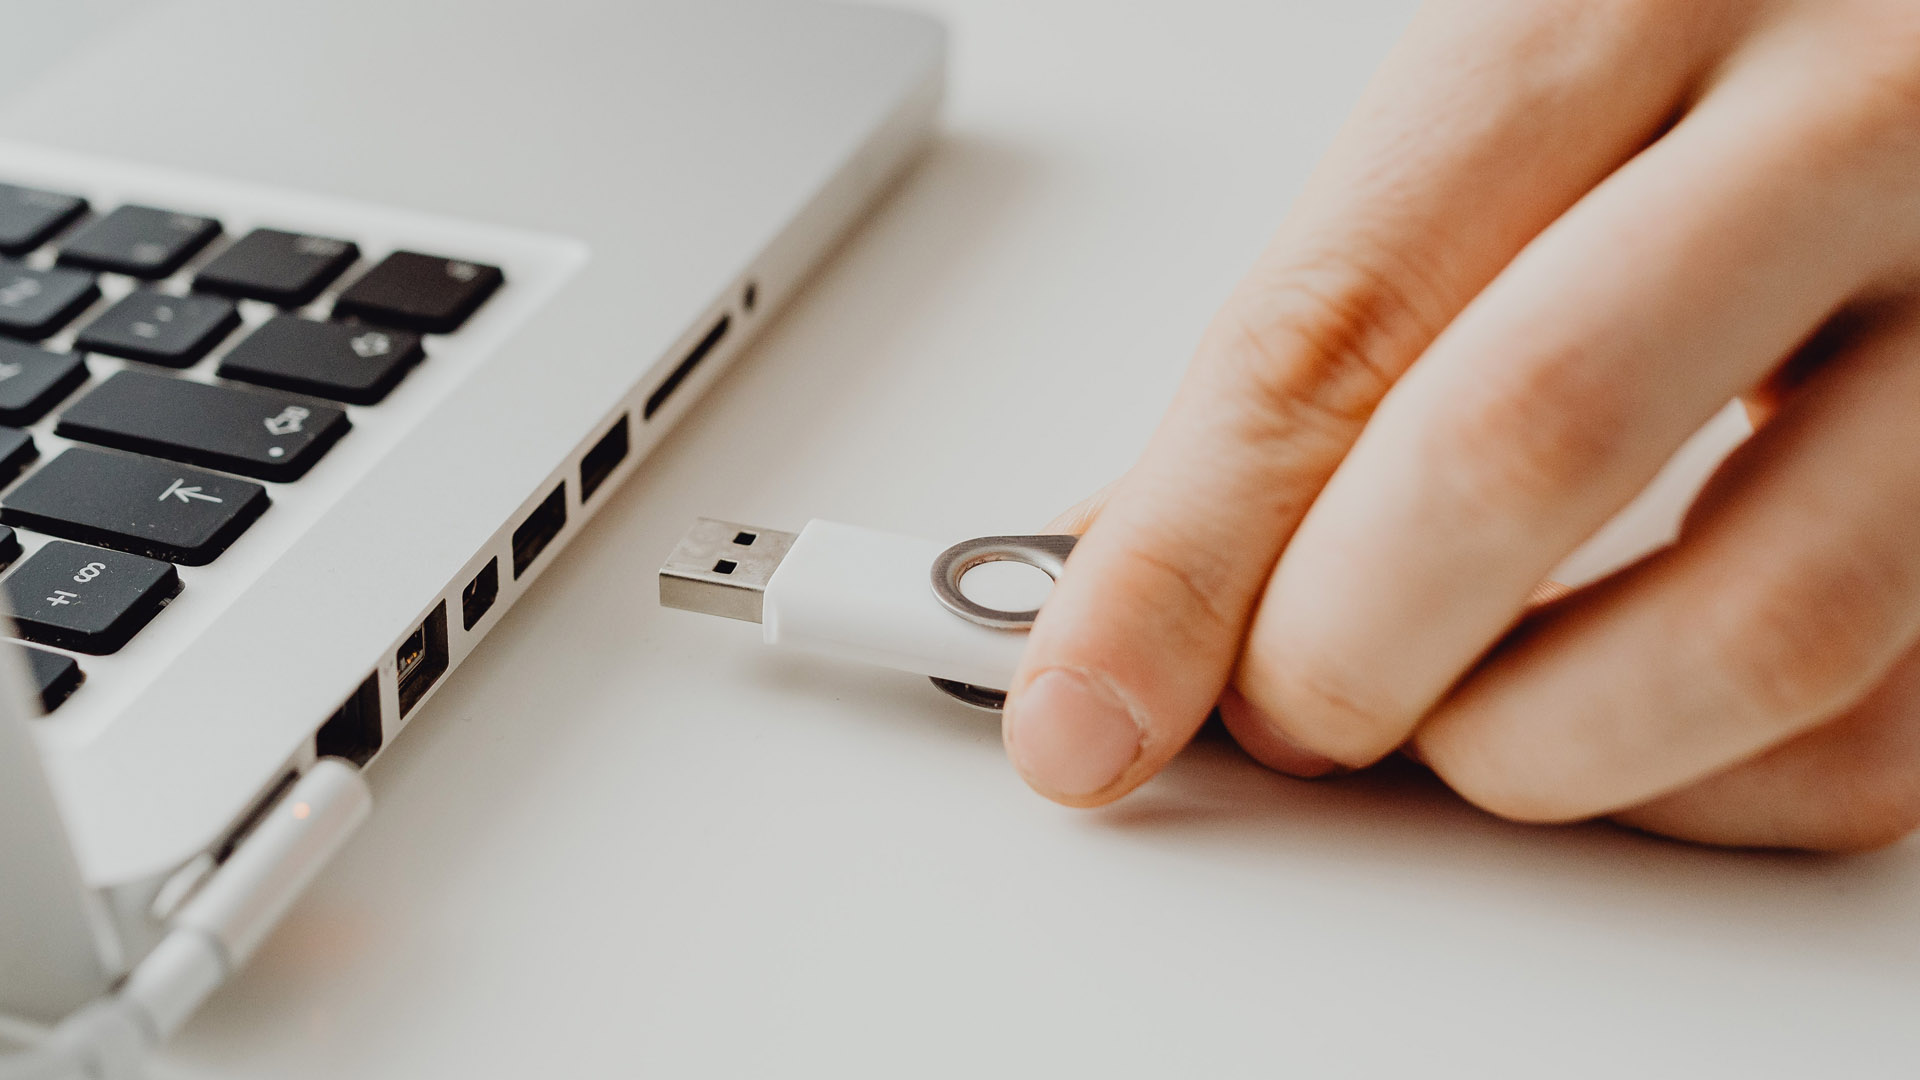 Journalists targeted by USB drives that explode in PCs